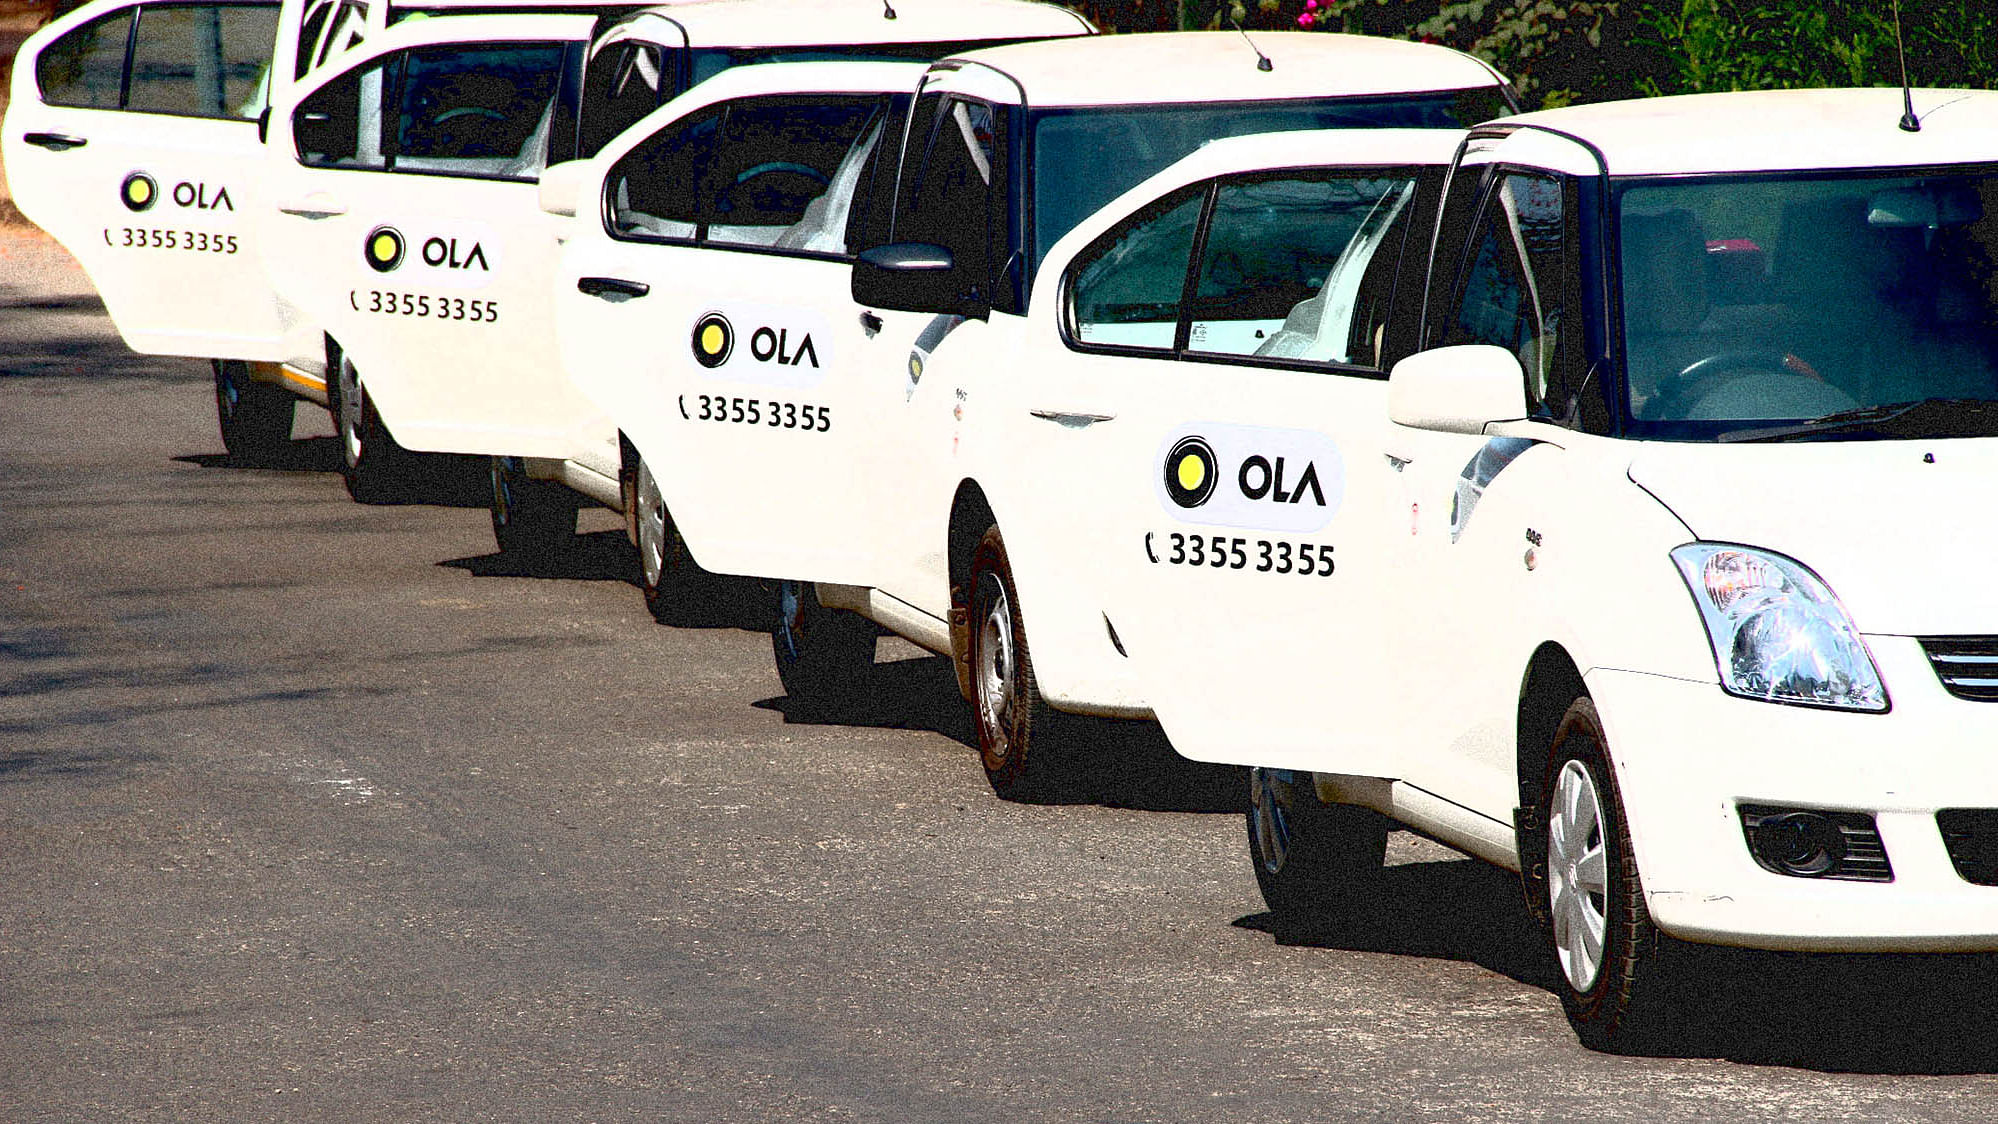 Ola has suspended ride-sharing feature on its app.